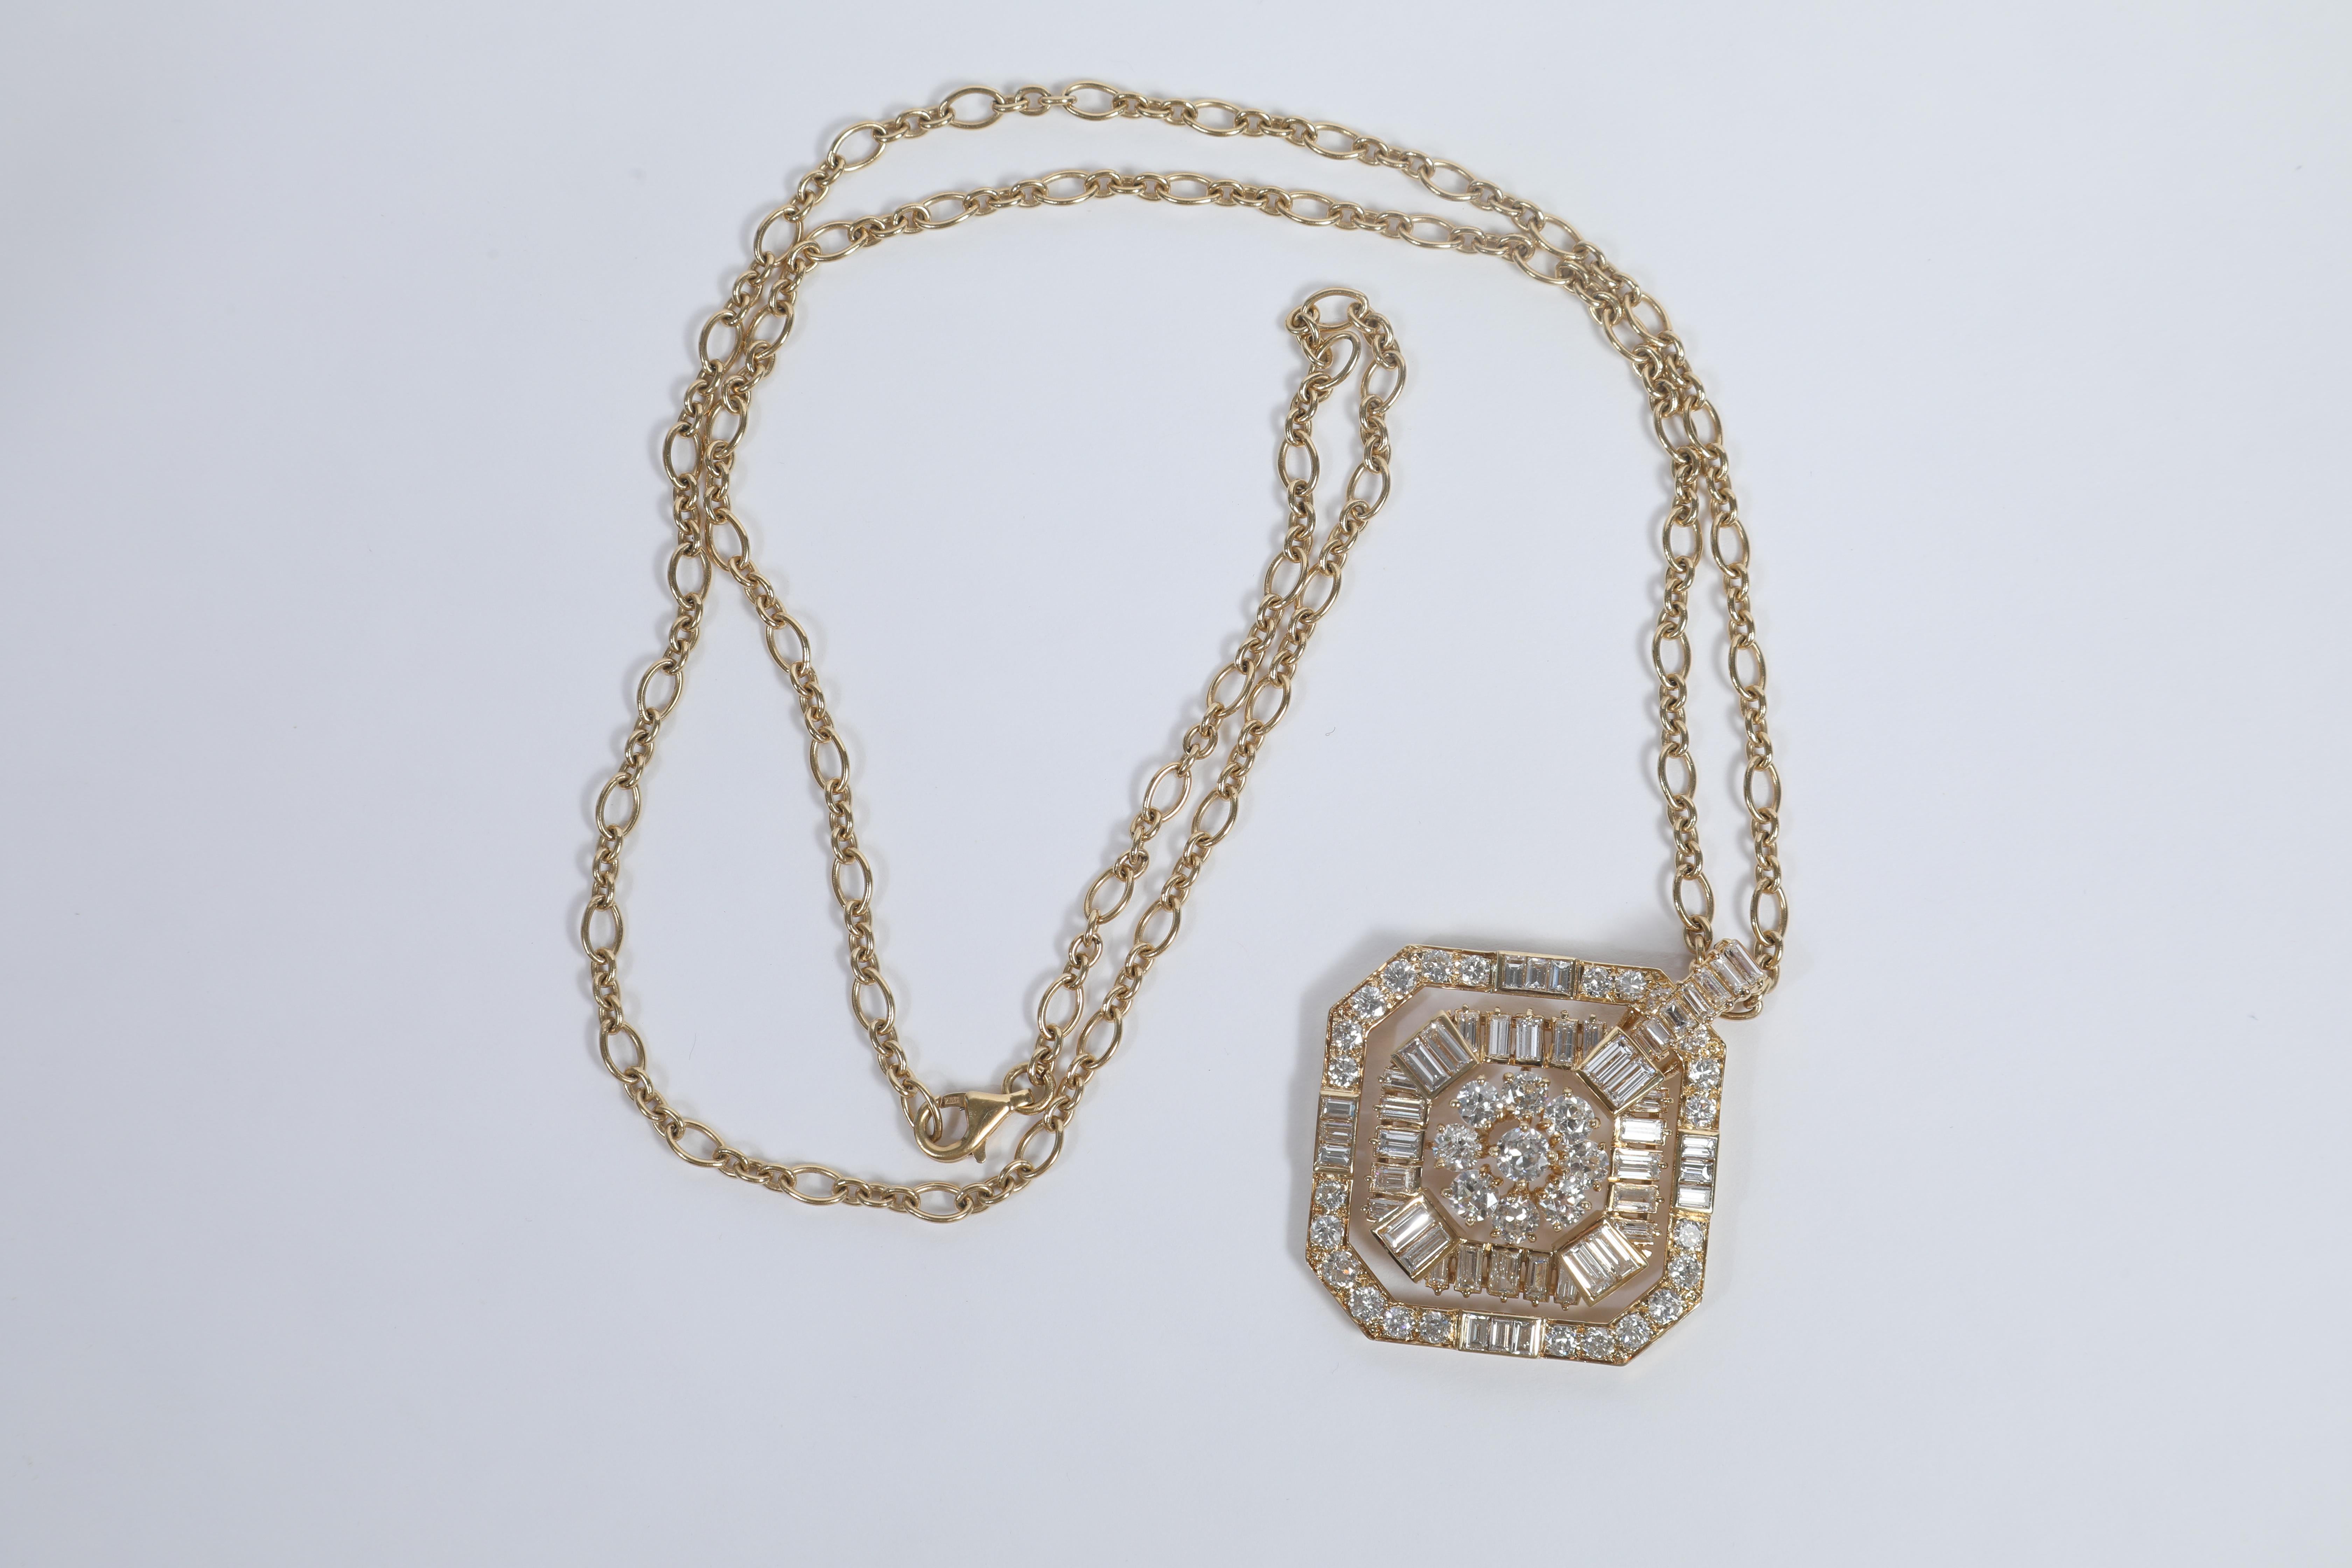 White diamonds and 18K yellow gold pendant, created in 1982
Typical luxurious jewel from the eighties
Diamonds weight: 8.77carats
18K gold chain weight: 18.98grams
Total weight: 37.96 grams
18K Gold chain lenght: 71.5cm
French assay mark